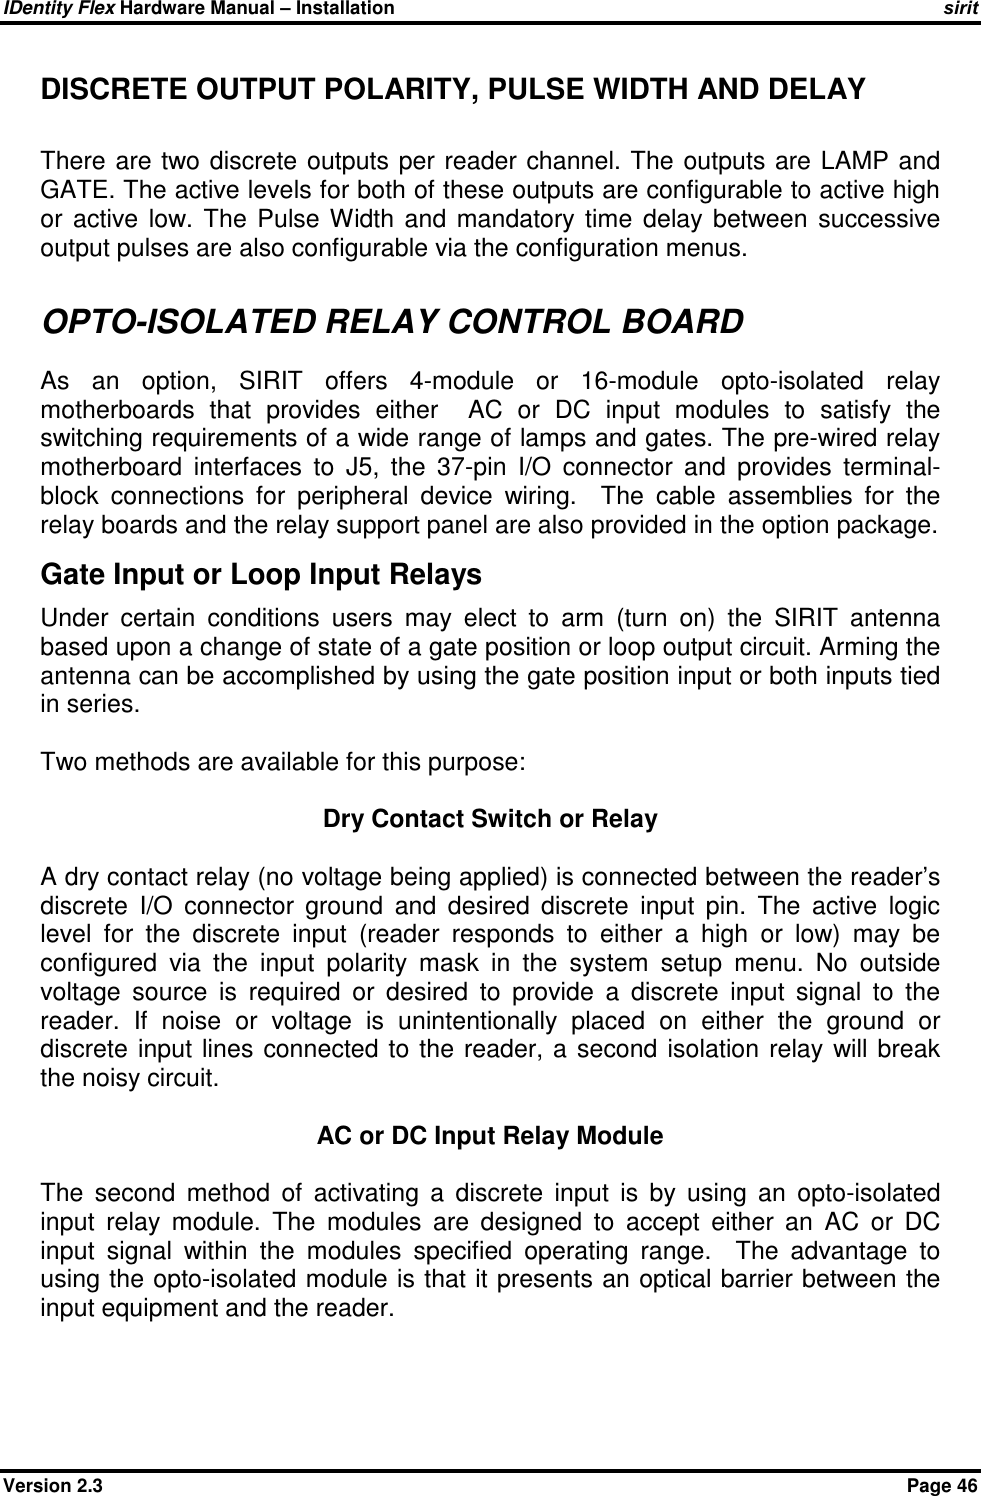 IDentity Flex Hardware Manual – Installation   sirit Version 2.3    Page 46 DISCRETE OUTPUT POLARITY, PULSE WIDTH AND DELAY  There  are two discrete  outputs per  reader channel.  The  outputs are LAMP and GATE. The active levels for both of these outputs are configurable to active high or  active  low.  The  Pulse  Width  and  mandatory  time  delay  between  successive output pulses are also configurable via the configuration menus.  OPTO-ISOLATED RELAY CONTROL BOARD As  an  option,  SIRIT  offers  4-module  or  16-module  opto-isolated  relay motherboards  that  provides  either    AC  or  DC  input  modules  to  satisfy  the switching requirements of a wide range of lamps and gates. The pre-wired relay motherboard  interfaces  to  J5,  the  37-pin  I/O  connector  and  provides  terminal-block  connections  for  peripheral  device  wiring.    The  cable  assemblies  for  the relay boards and the relay support panel are also provided in the option package. Gate Input or Loop Input Relays Under  certain  conditions  users  may  elect  to  arm  (turn  on)  the  SIRIT  antenna based upon a change of state of a gate position or loop output circuit. Arming the antenna can be accomplished by using the gate position input or both inputs tied in series.    Two methods are available for this purpose:  Dry Contact Switch or Relay   A dry contact relay (no voltage being applied) is connected between the reader’s discrete  I/O  connector  ground  and  desired  discrete  input  pin.  The  active  logic level  for  the  discrete  input  (reader  responds  to  either  a  high  or  low)  may  be configured  via  the  input  polarity  mask  in  the  system  setup  menu.  No  outside voltage  source  is  required  or  desired  to  provide  a  discrete  input  signal  to  the reader.  If  noise  or  voltage  is  unintentionally  placed  on  either  the  ground  or discrete  input  lines  connected  to the  reader,  a second  isolation  relay will  break the noisy circuit.   AC or DC Input Relay Module   The  second  method  of  activating  a  discrete  input  is  by  using  an  opto-isolated input  relay  module.  The  modules  are  designed  to  accept  either  an  AC  or  DC input  signal  within  the  modules  specified  operating  range.    The  advantage  to using the opto-isolated module is that it presents an optical barrier between the input equipment and the reader.  